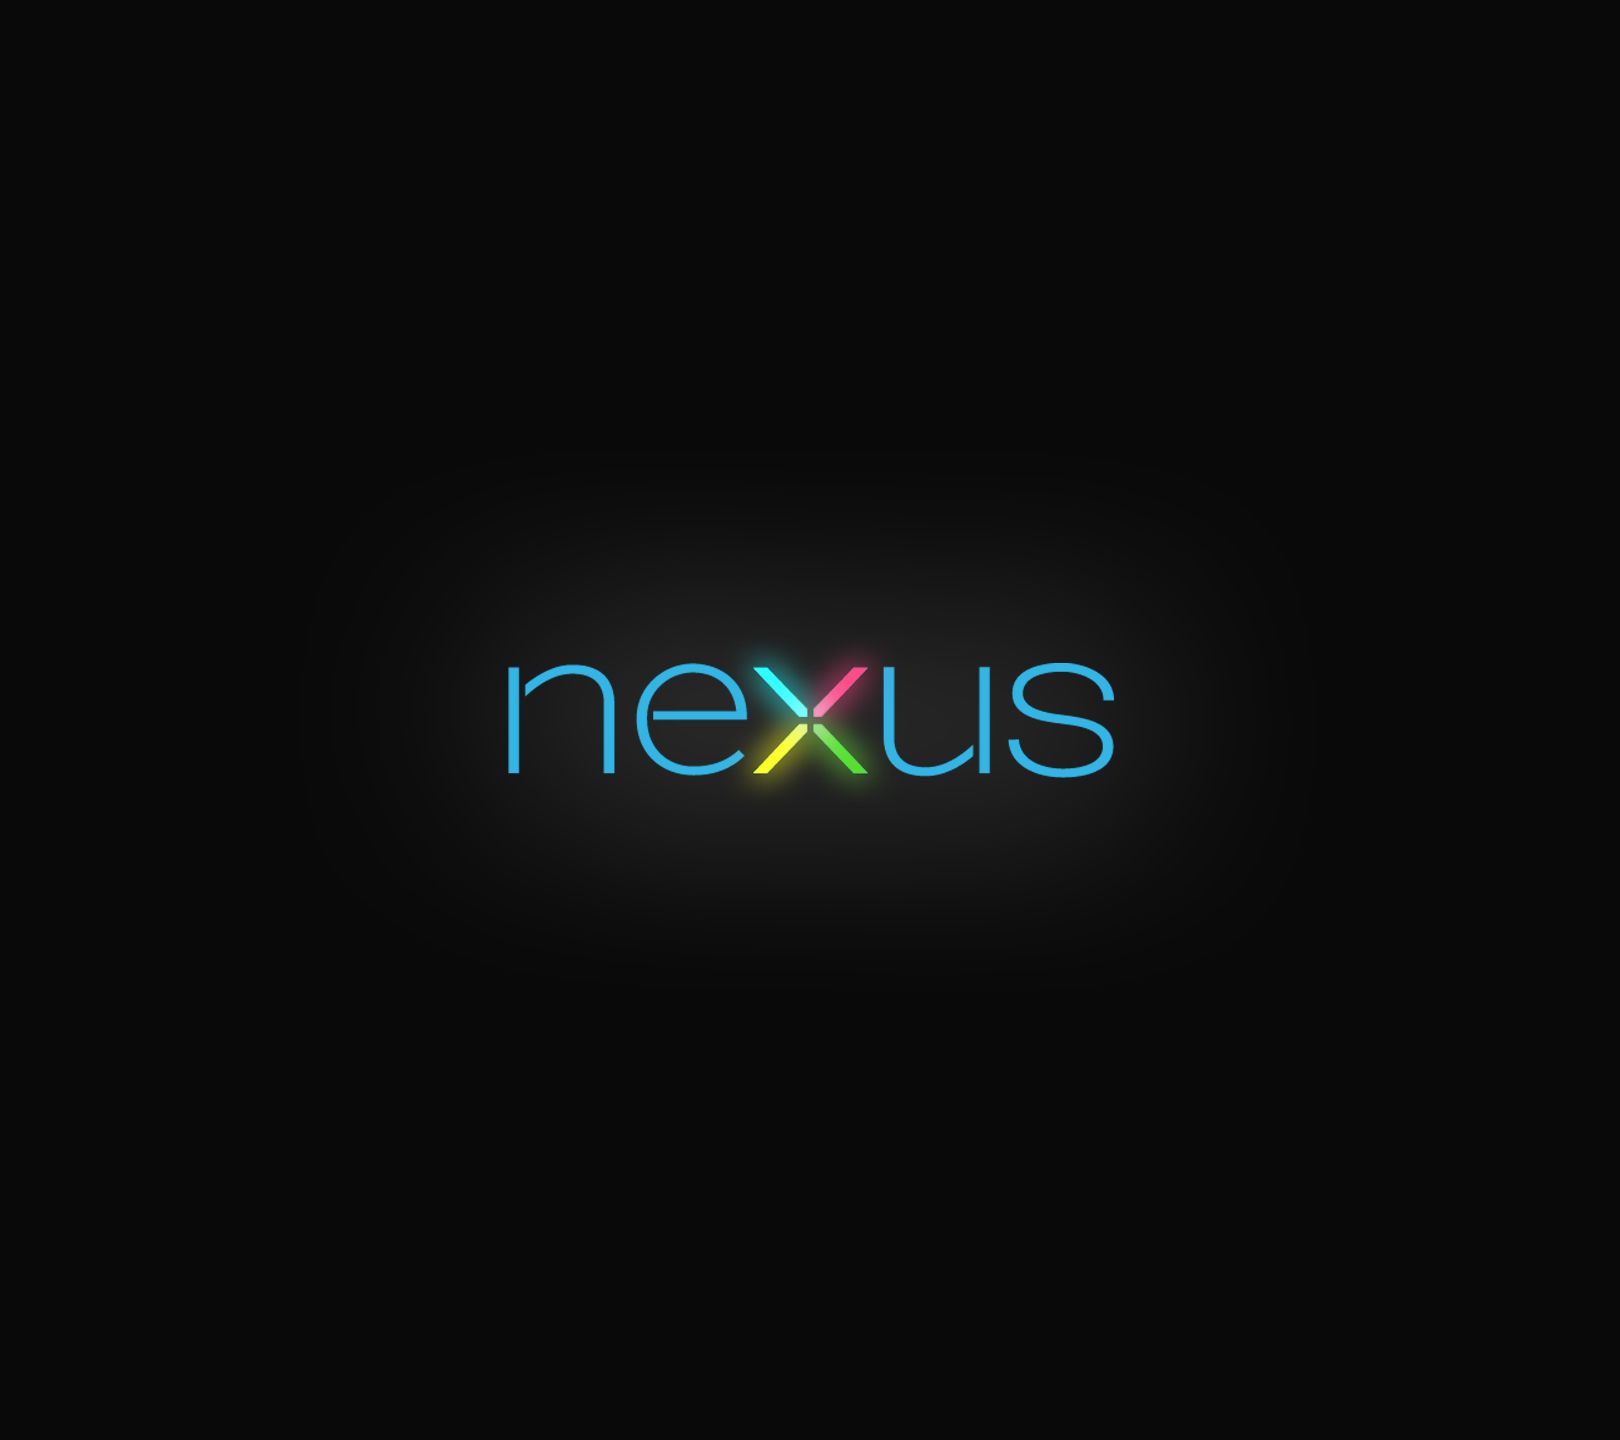 Nexus Android Wallpaper hd wallpapers ›› Page 0 | ForWallpapers.com